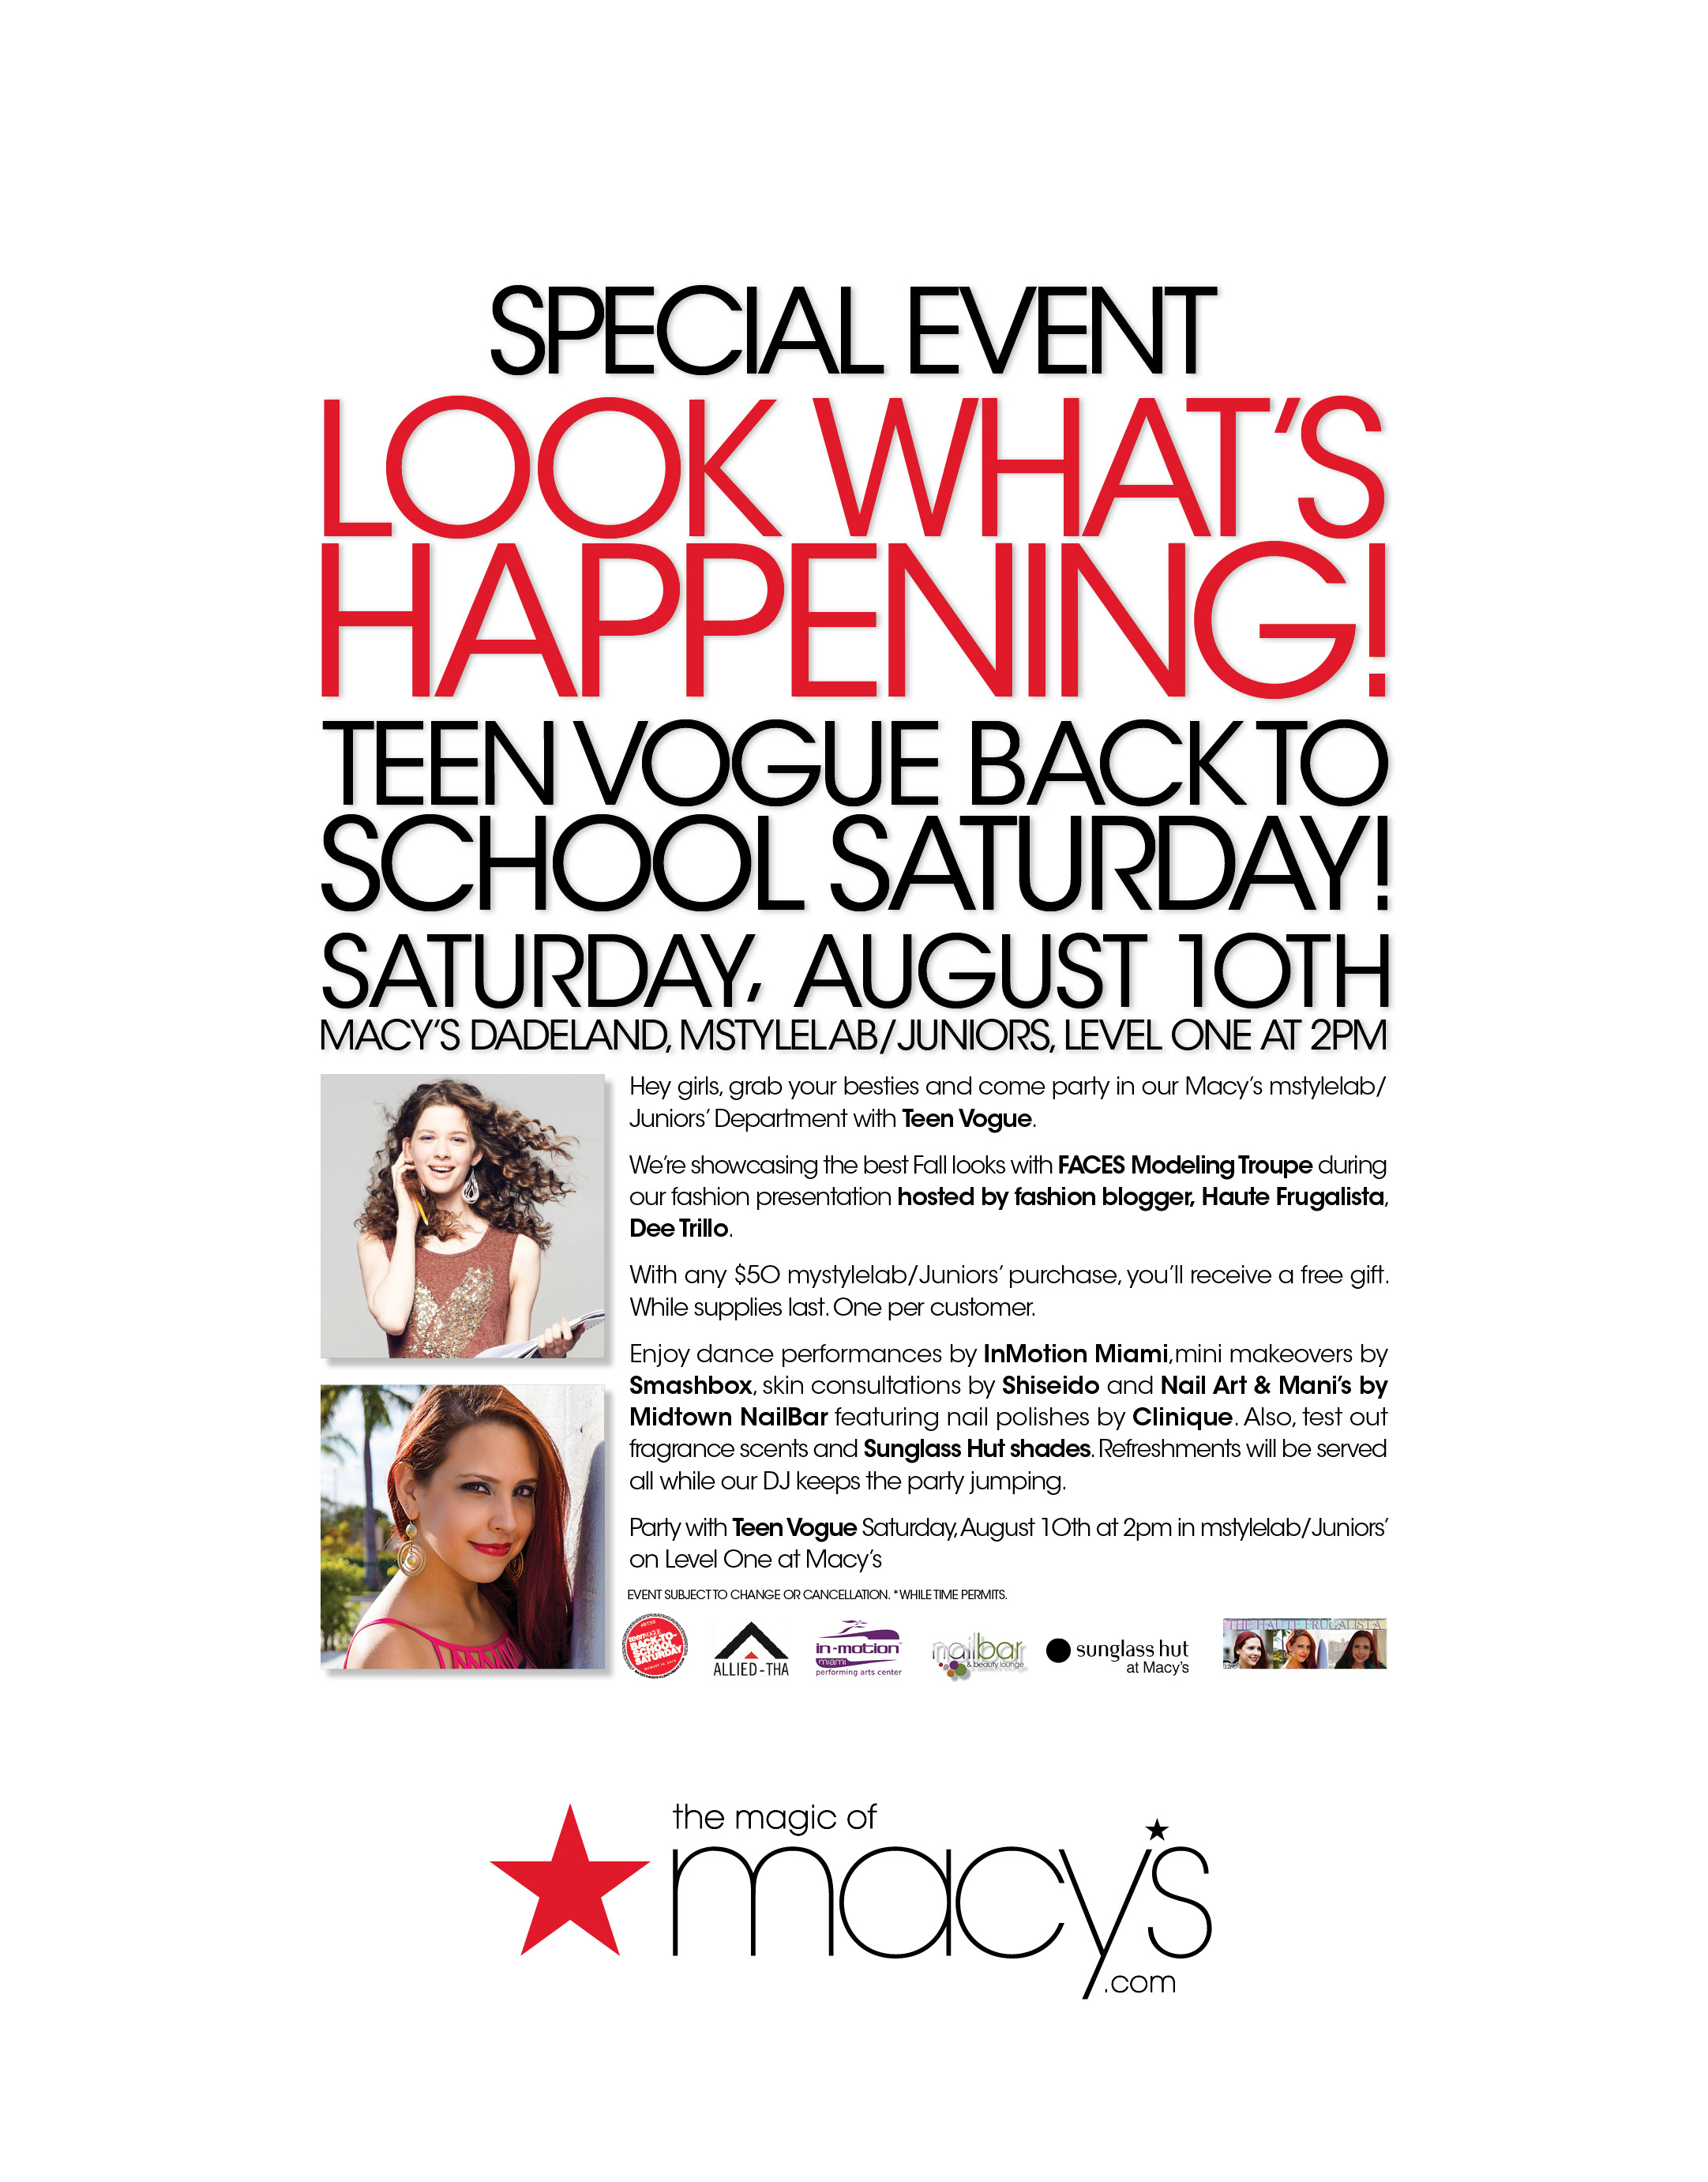 Teen Vogue Back To School Saturday at Dadeland Macy's August 10th